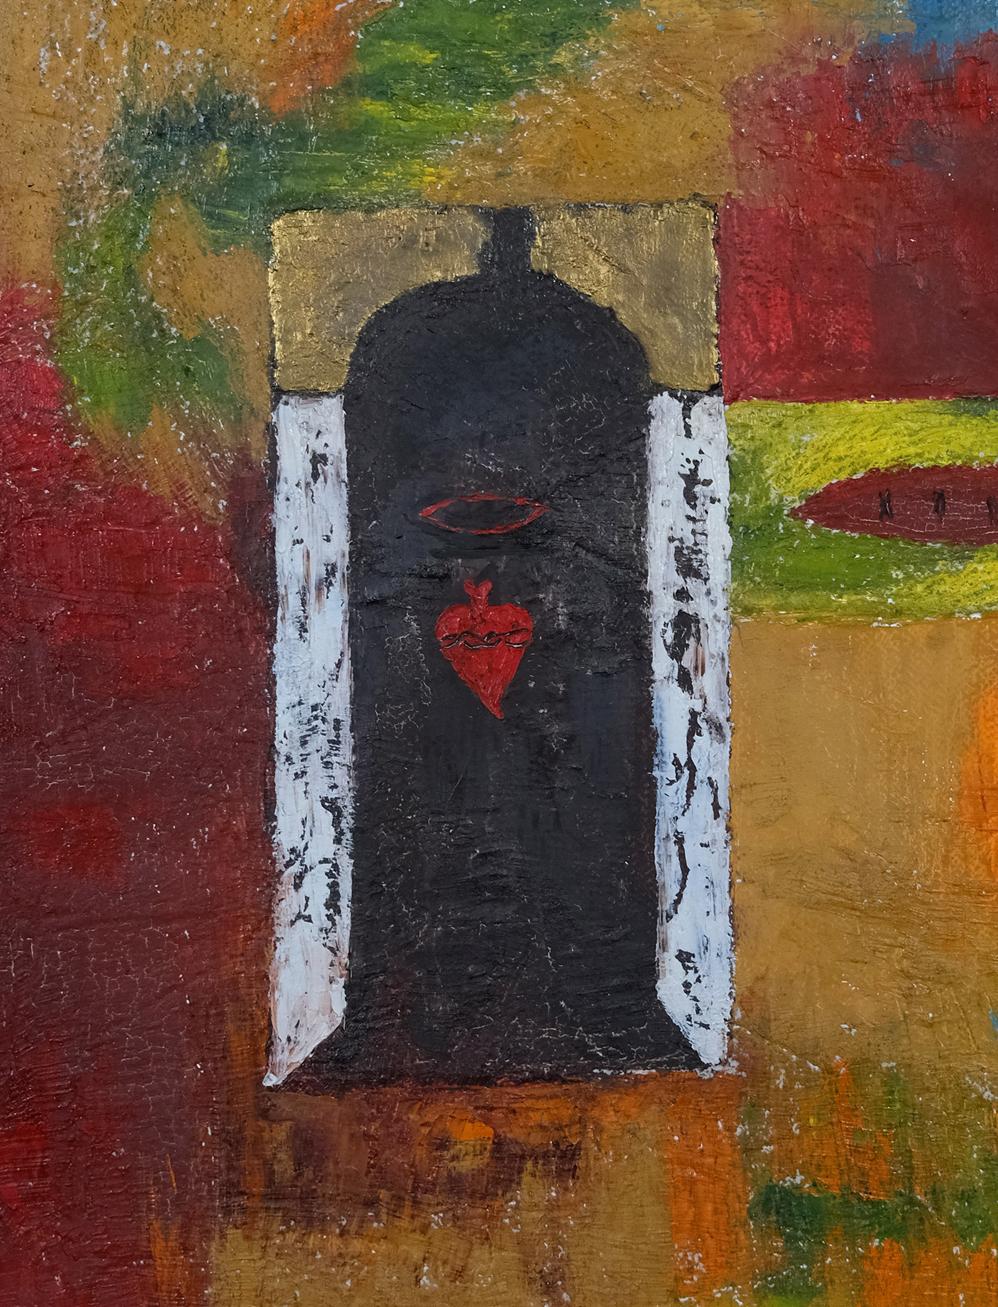  Open Door to the Heart  Oil on Paper  Mixed Media  Ecuador Framed  Quito - Impressionist Painting by Luis Salazar